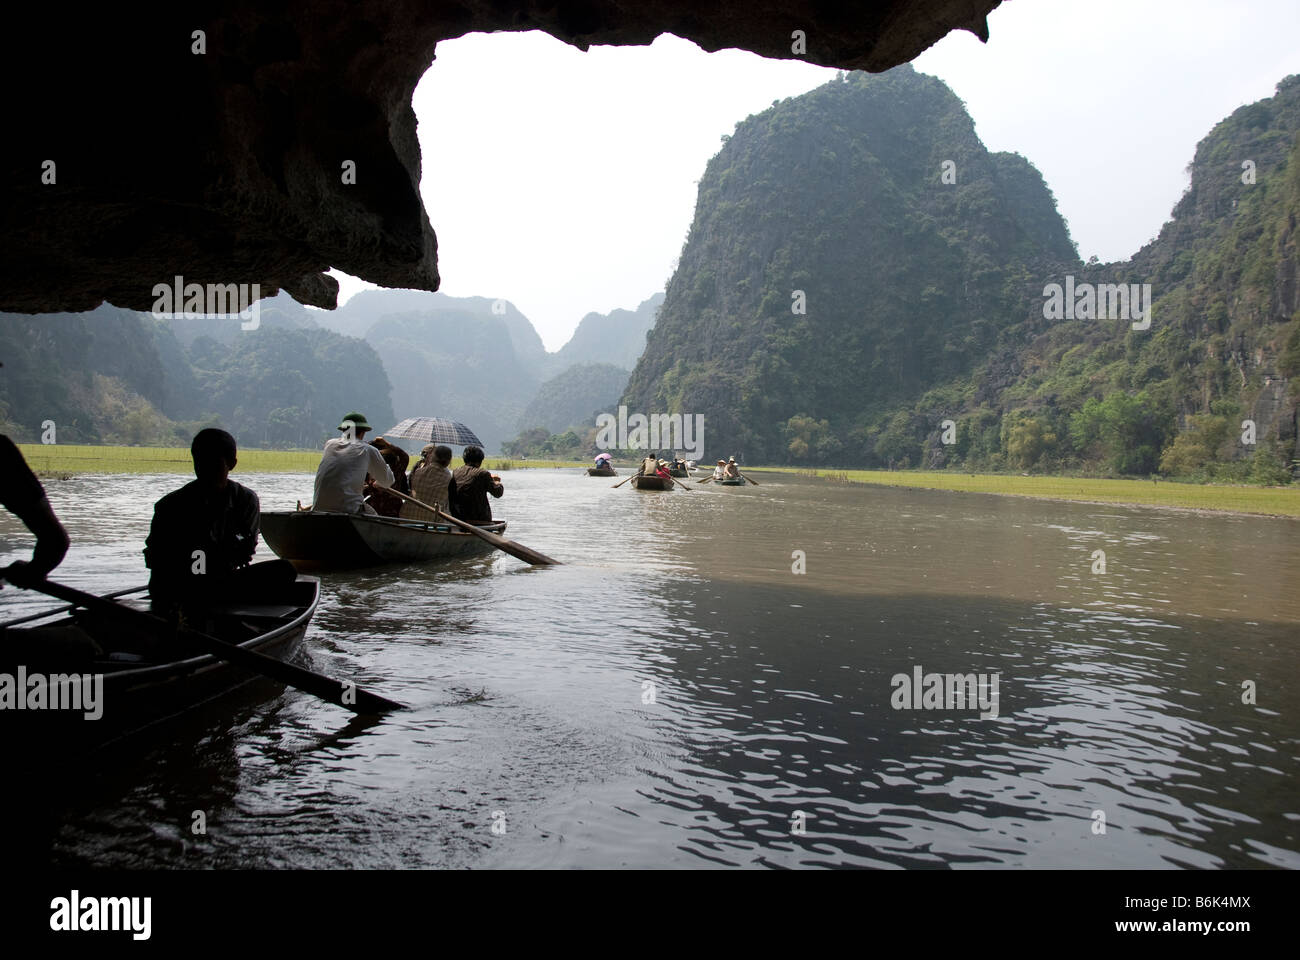 Tam Coc (Three Caves) on the Ngo Dong River, north Vietnam A boat ride on the Ngo Dong River Tam Coc, Vietnam Stock Photo